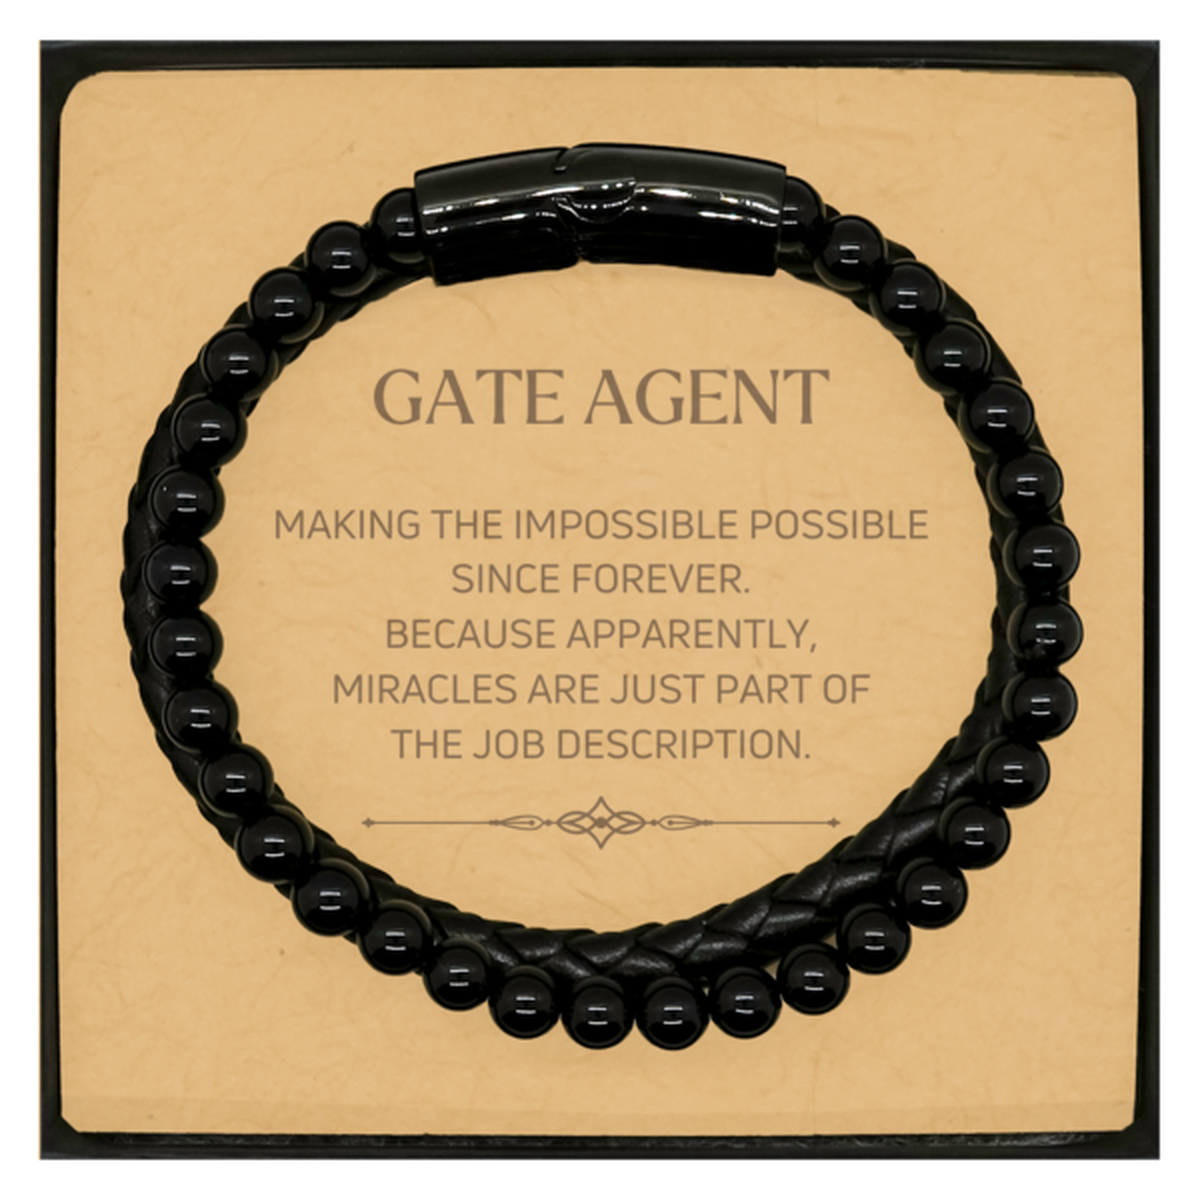 Funny Gate Agent Gifts, Miracles are just part of the job description, Inspirational Birthday Christmas Stone Leather Bracelets For Gate Agent, Men, Women, Coworkers, Friends, Boss